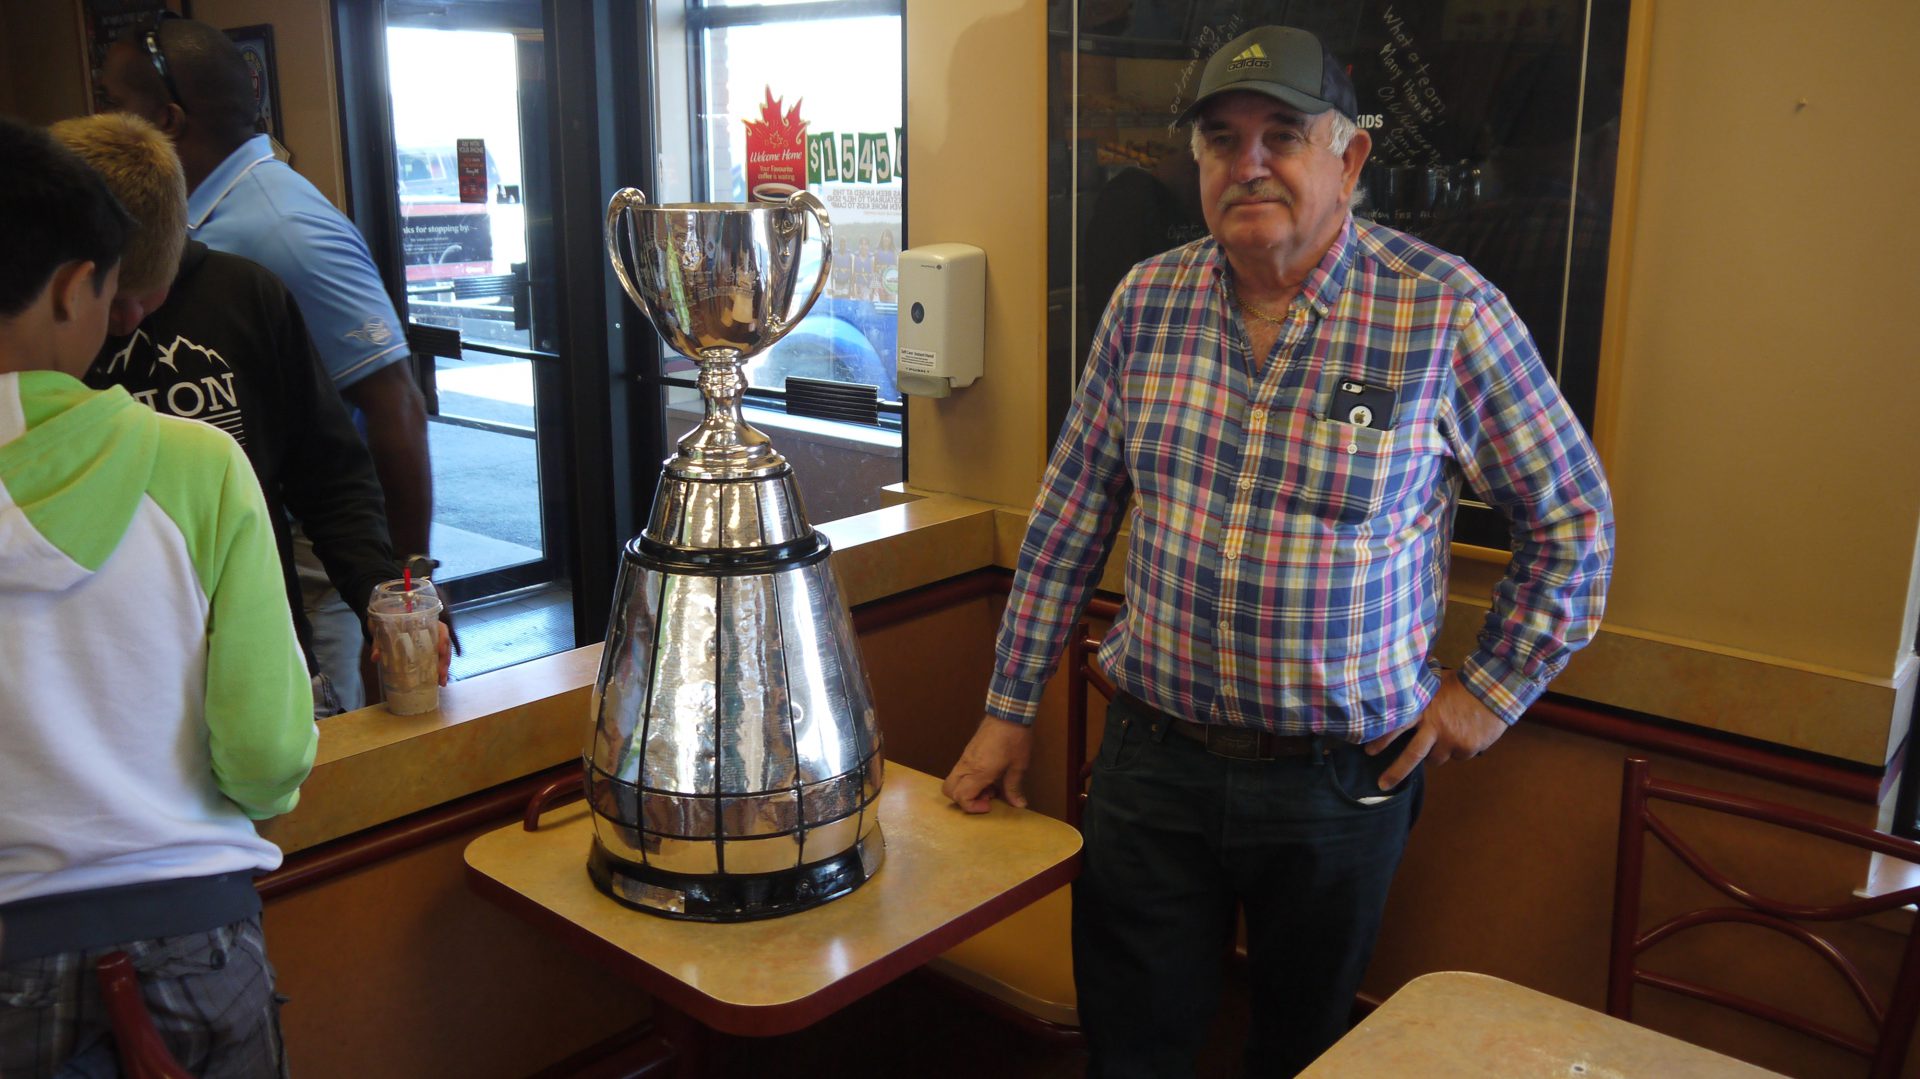 A fan poses with the Grey Cup at Tim Hortons.